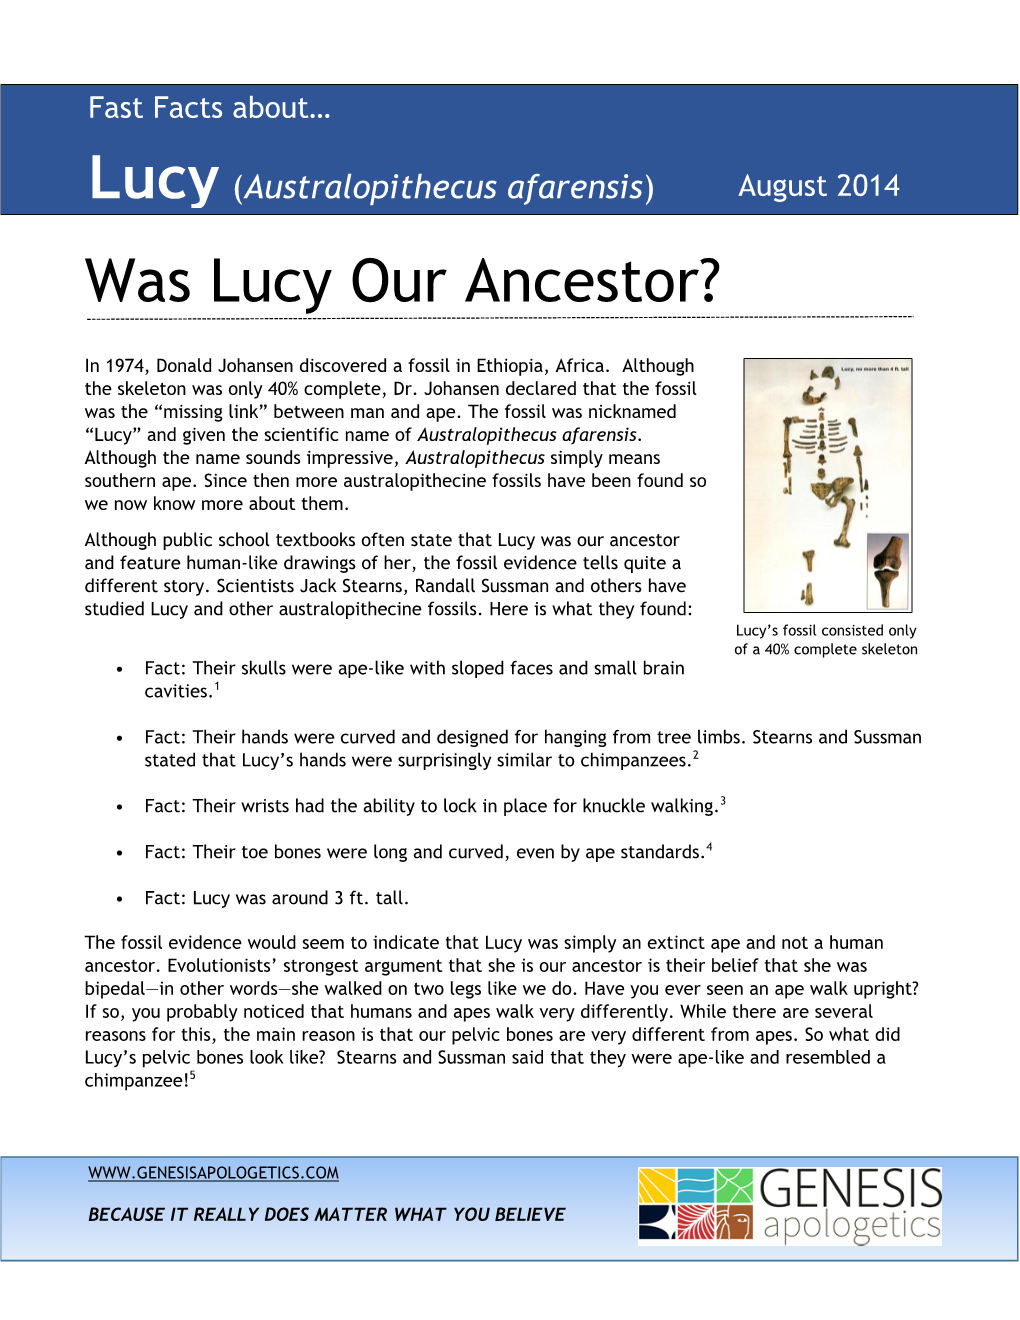 Was Lucy Our Ancestor?